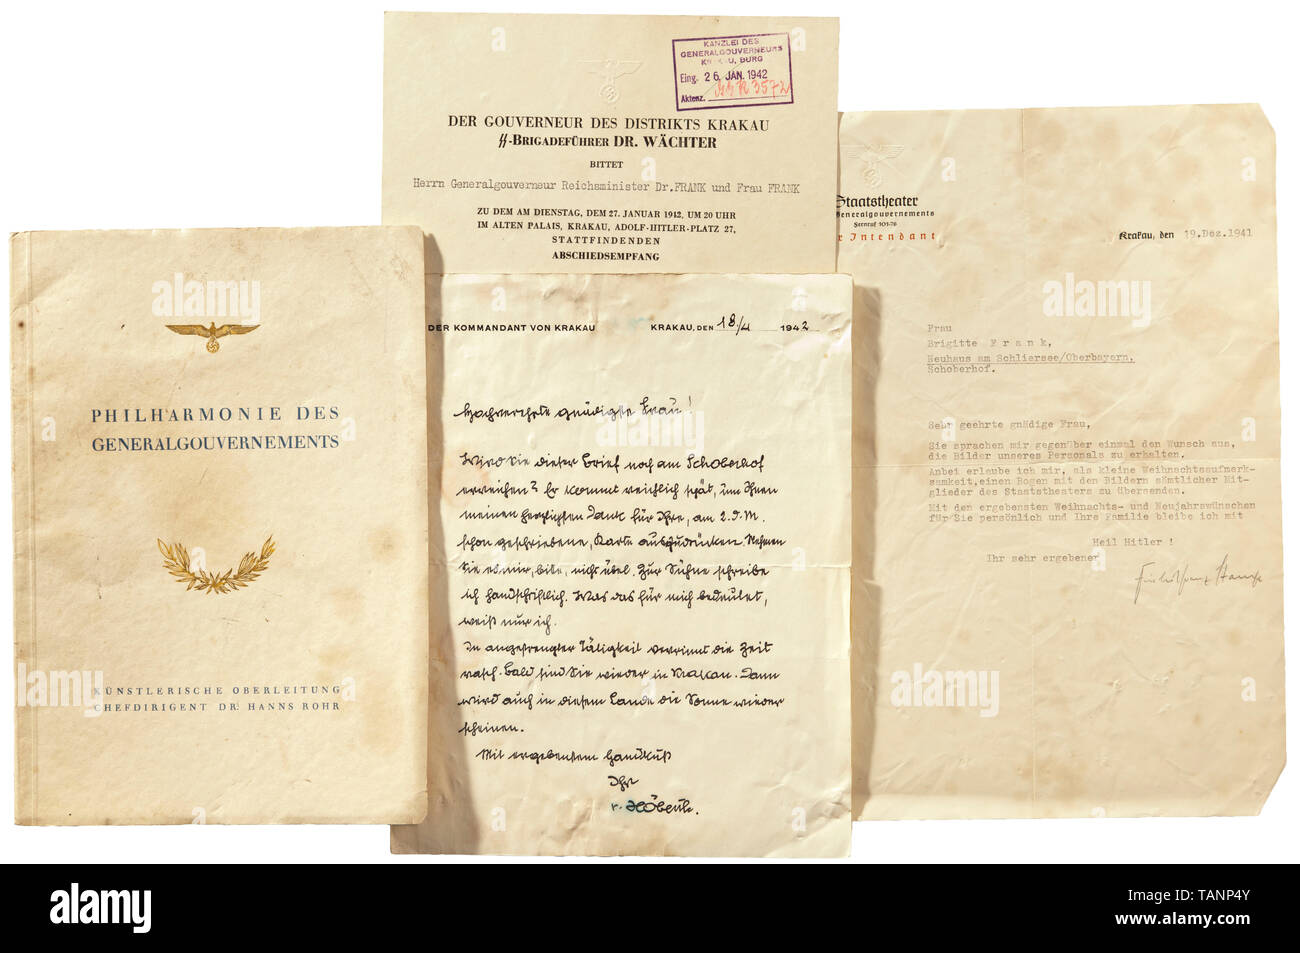 Governor General and Reich Minister Dr. Hans Frank - documents from his estate, Approximately 30 invitations, menus, documents, vis 20th century, Editorial-Use-Only Stock Photo